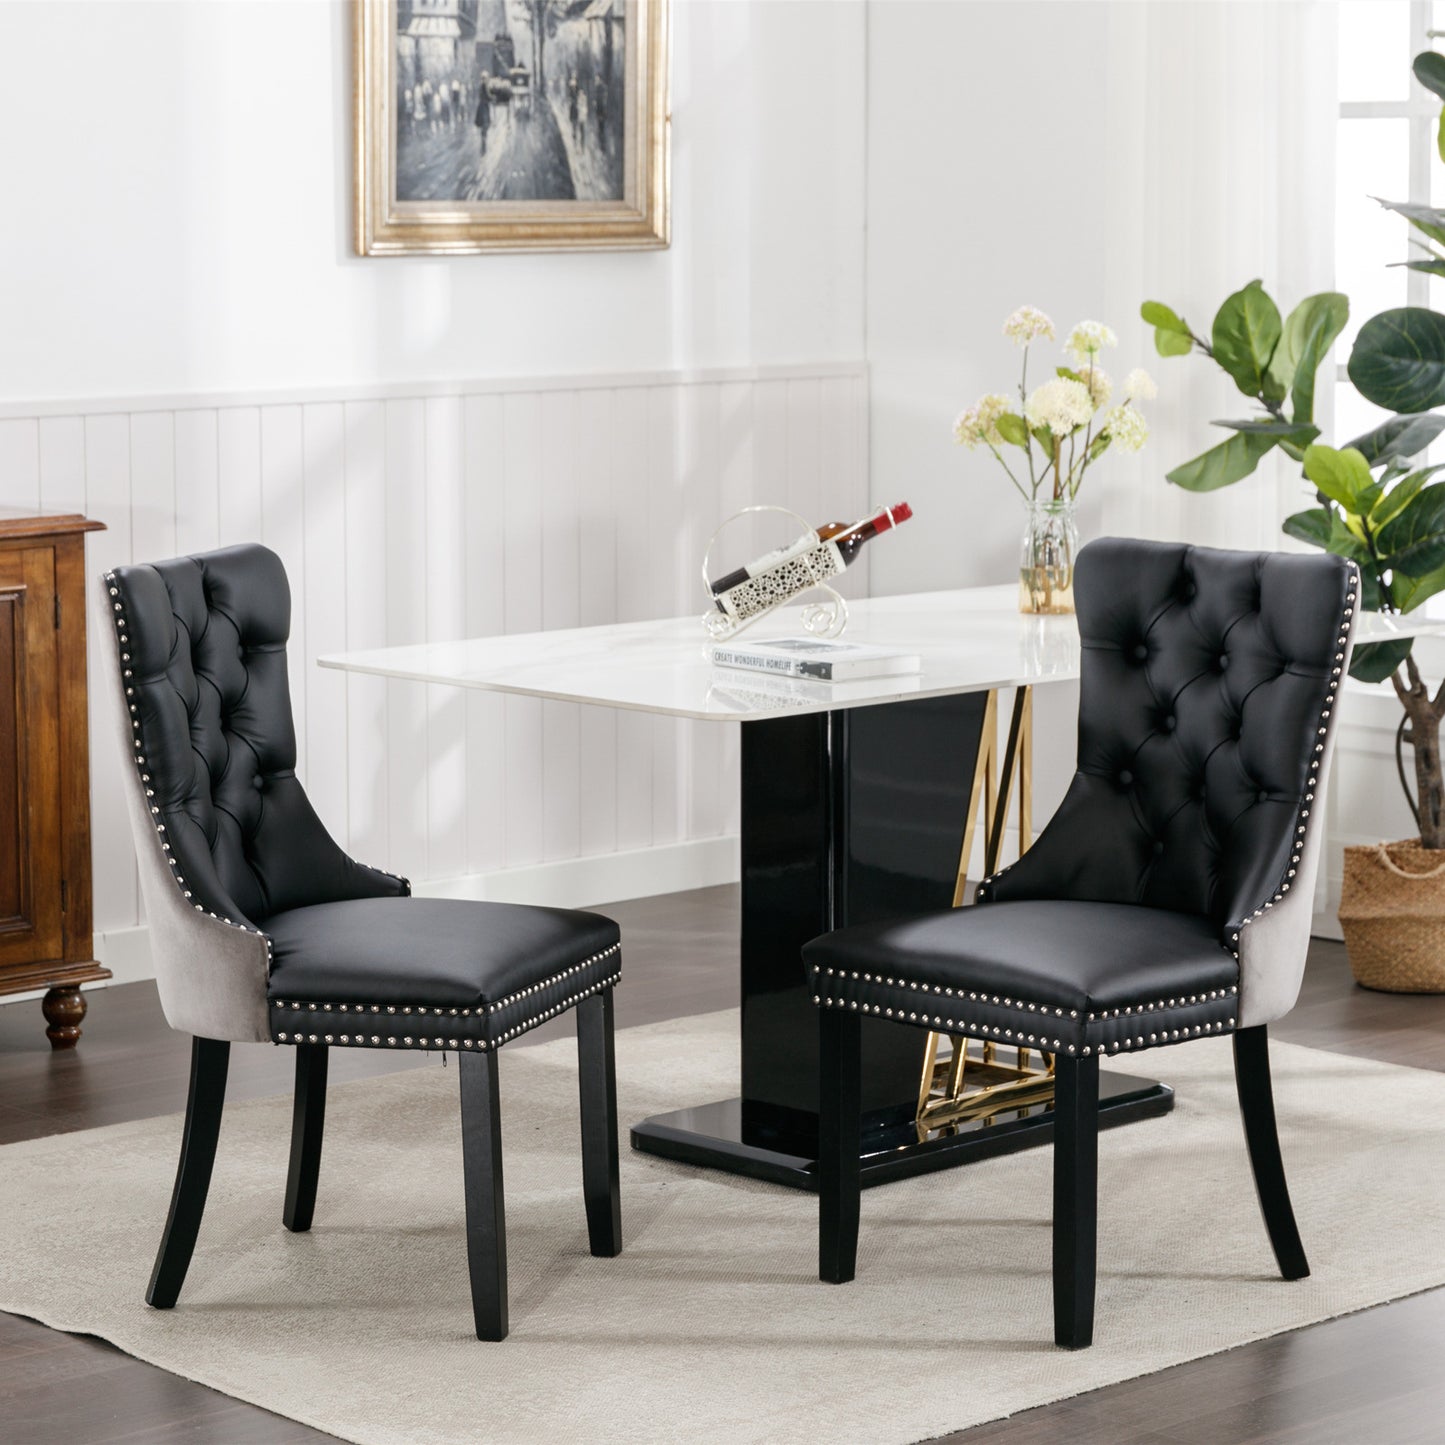 nikki collection modern high-end tufted dining chairs 2-pcs set, black+gray